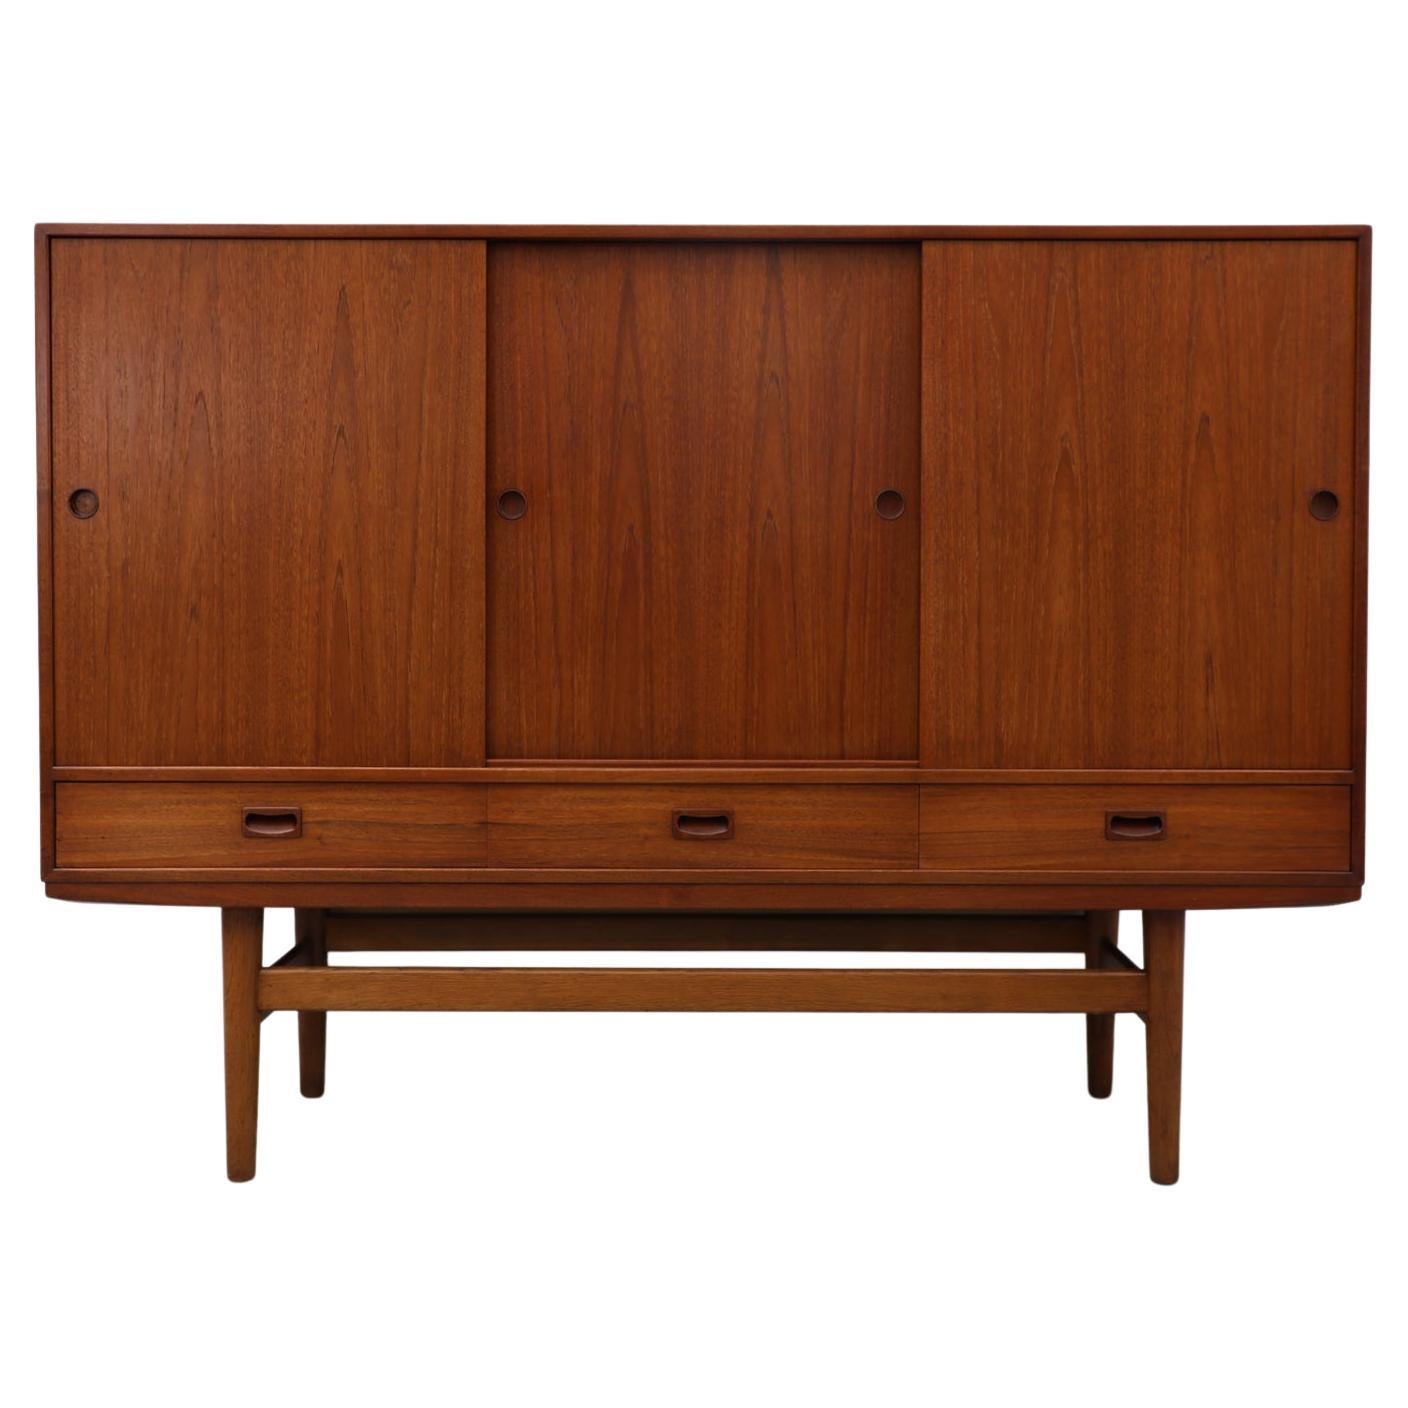 Mid-Century Danish Teak Highboard with Sliding Door Cabinets and Drawers For Sale